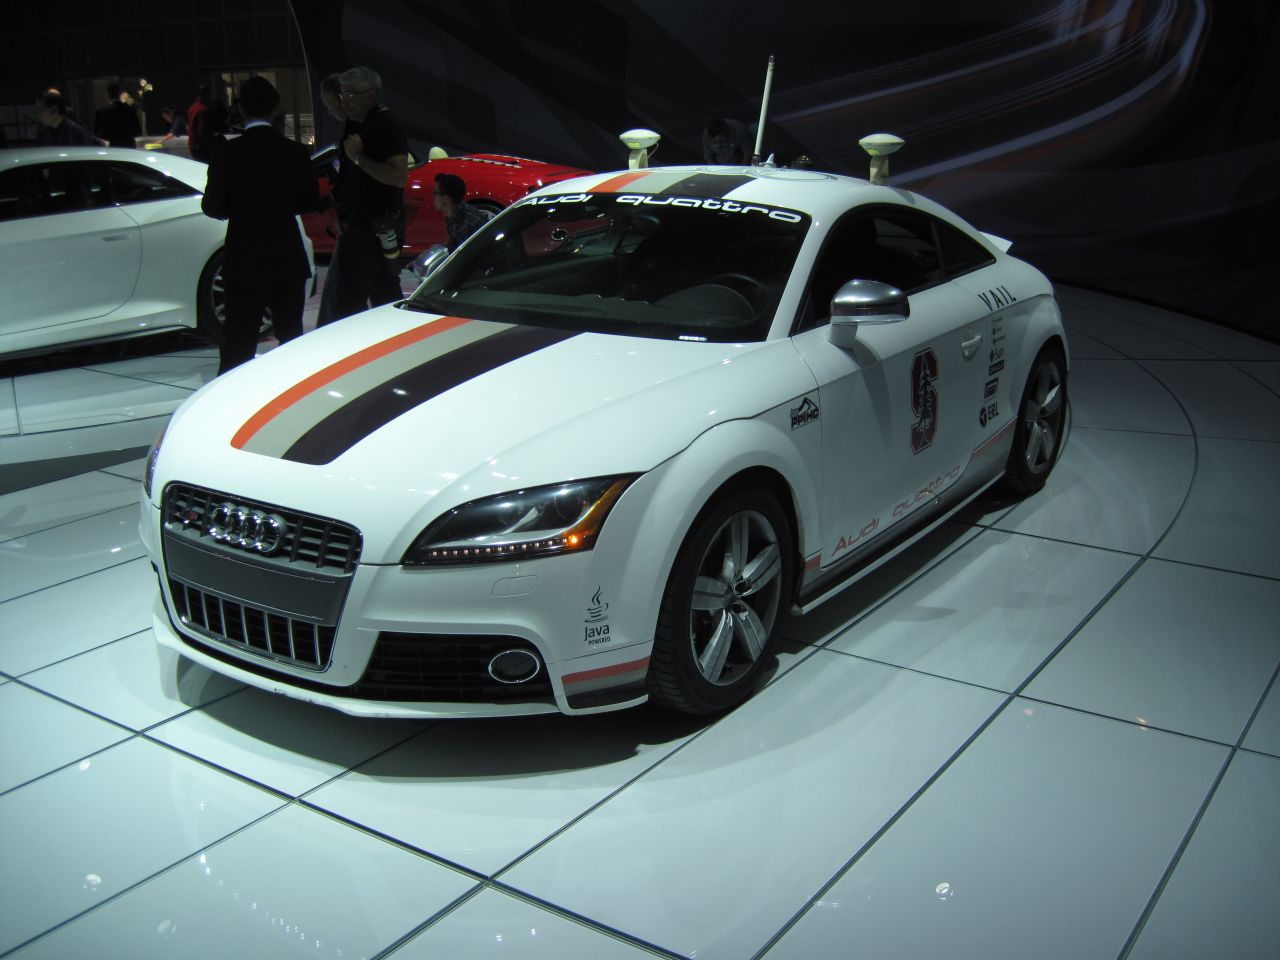 This autonomous Audi TTS Pikes Peak was unveiled in 2010. The vehicle features a pair of trunk-located computers that allow it to drive on the outer edges of its speed and handling limits without a driver. 